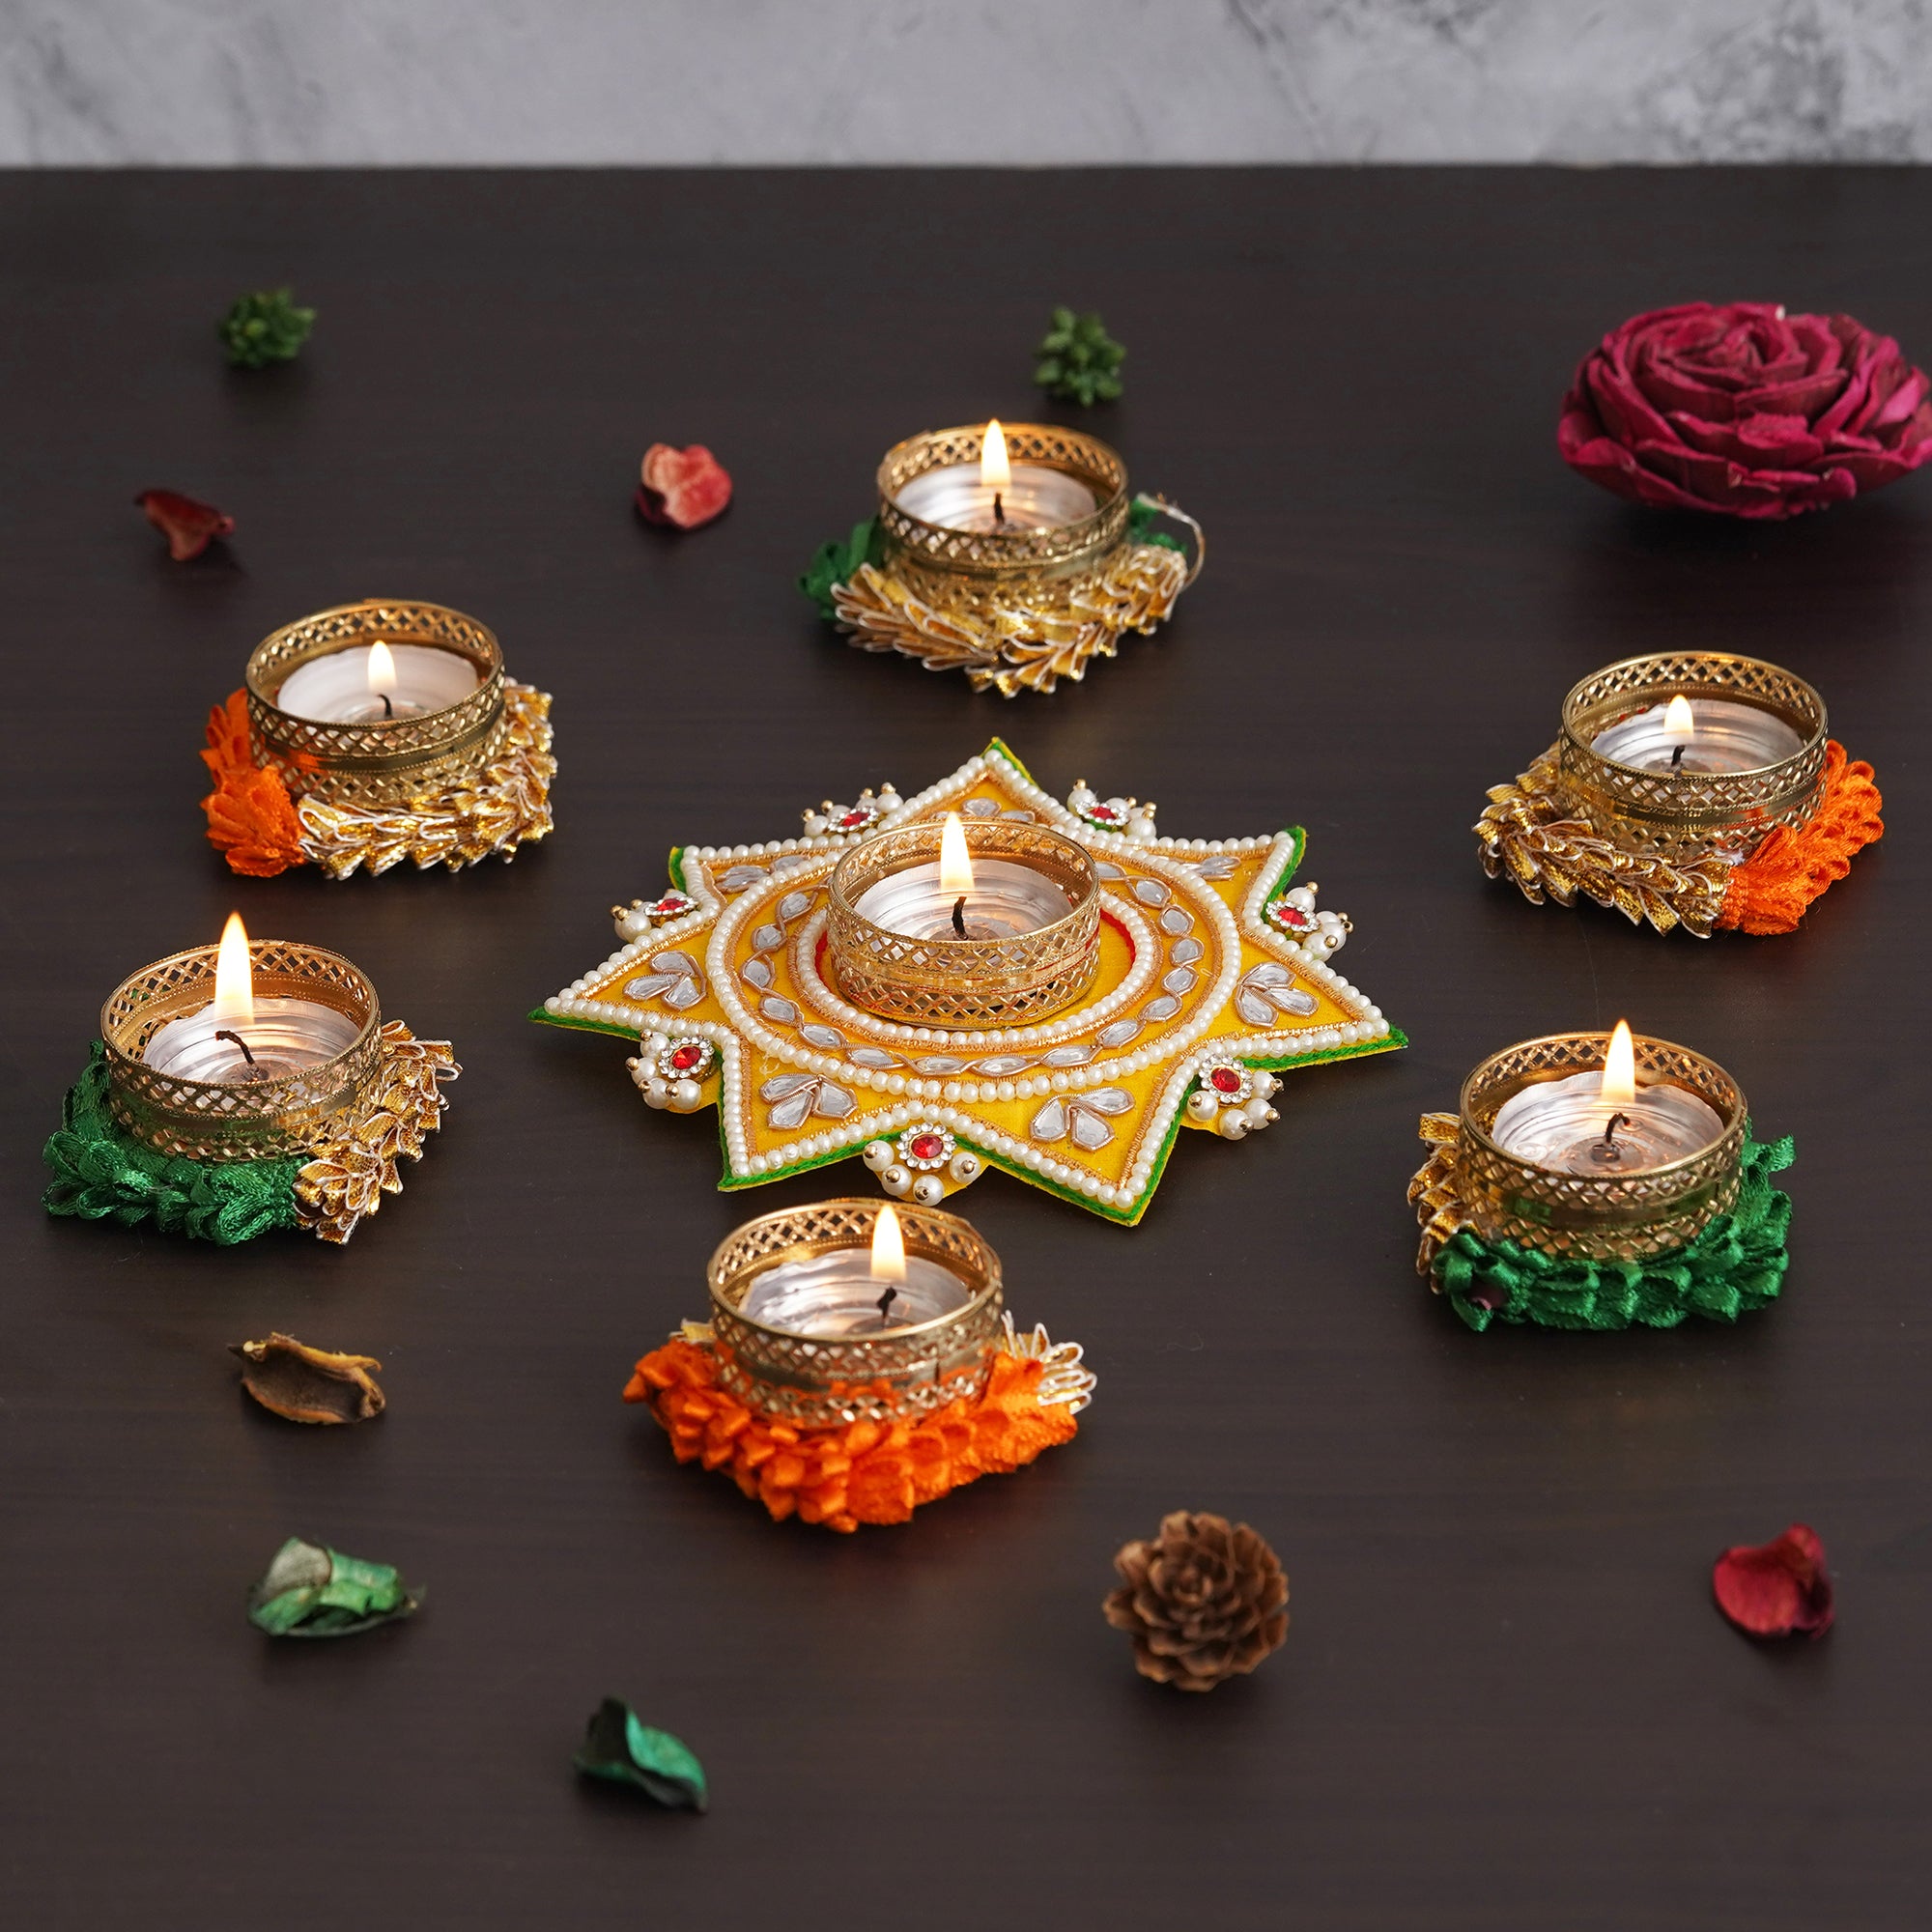 eCraftIndia Set of 7 Round and Star Shaped Diamond Beads and Pearls Decorative Tea Light Candle Holders 4